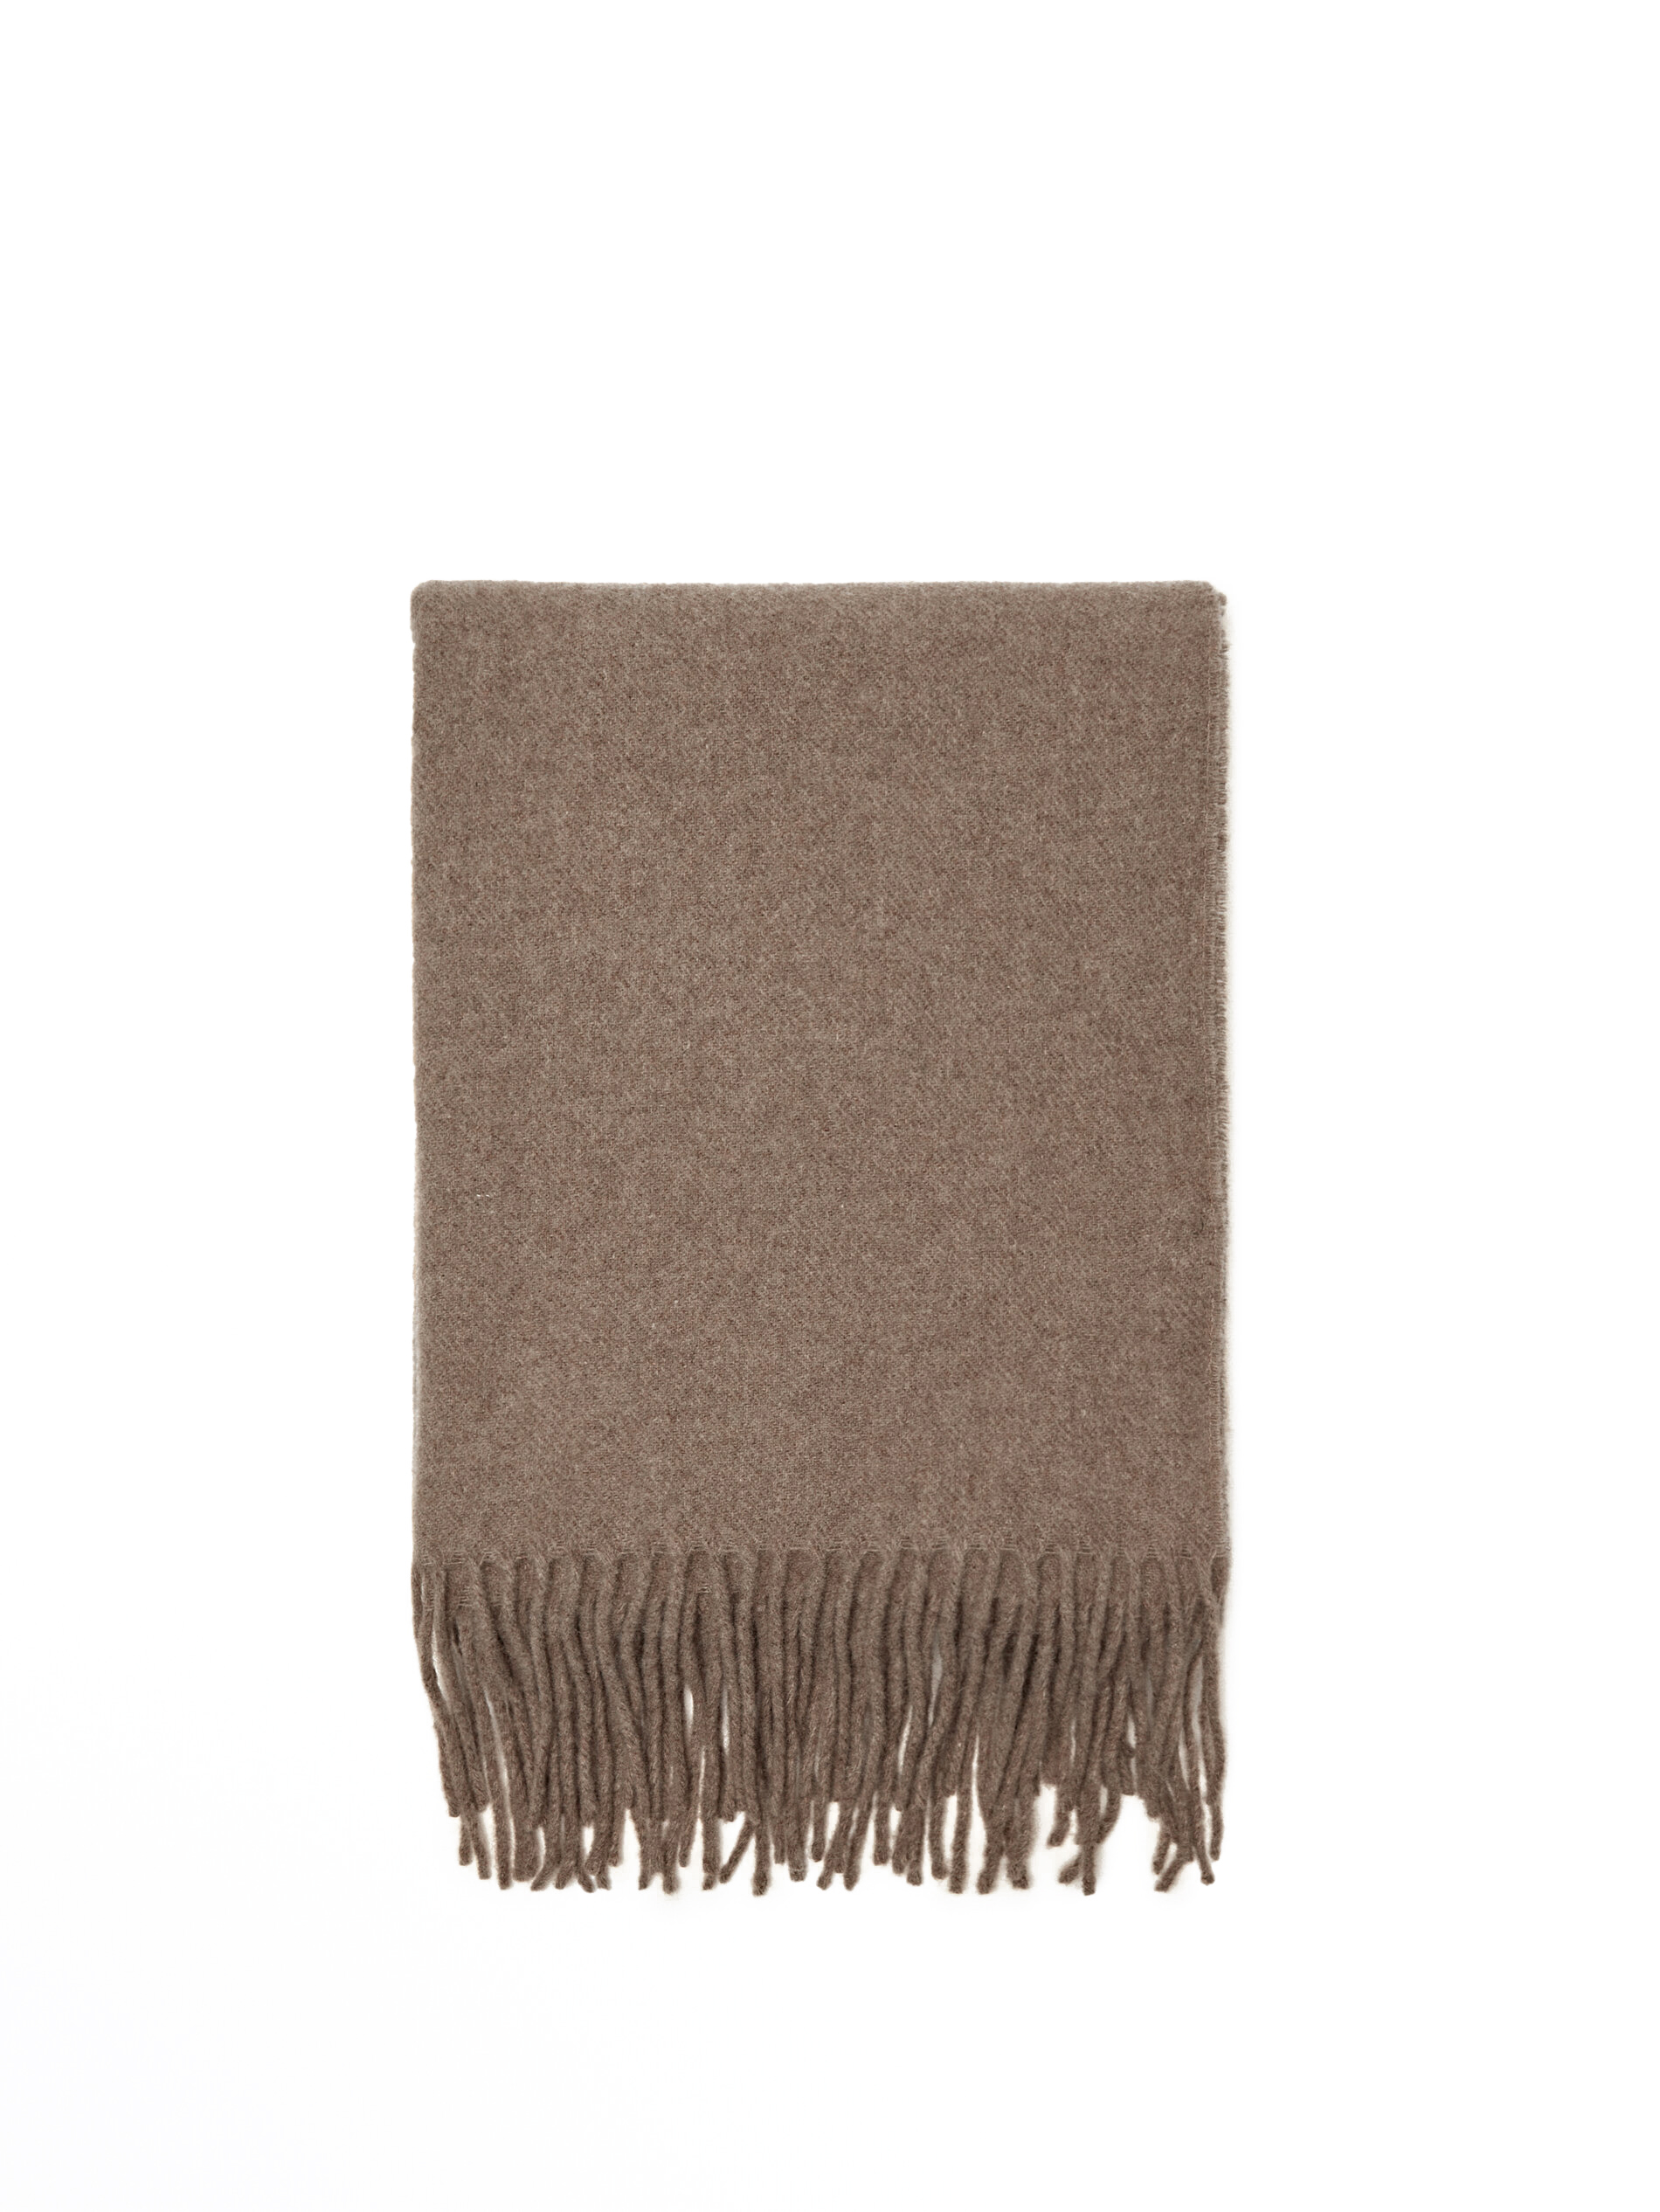 100% WOOL SCARF WITH FRINGE DETAIL